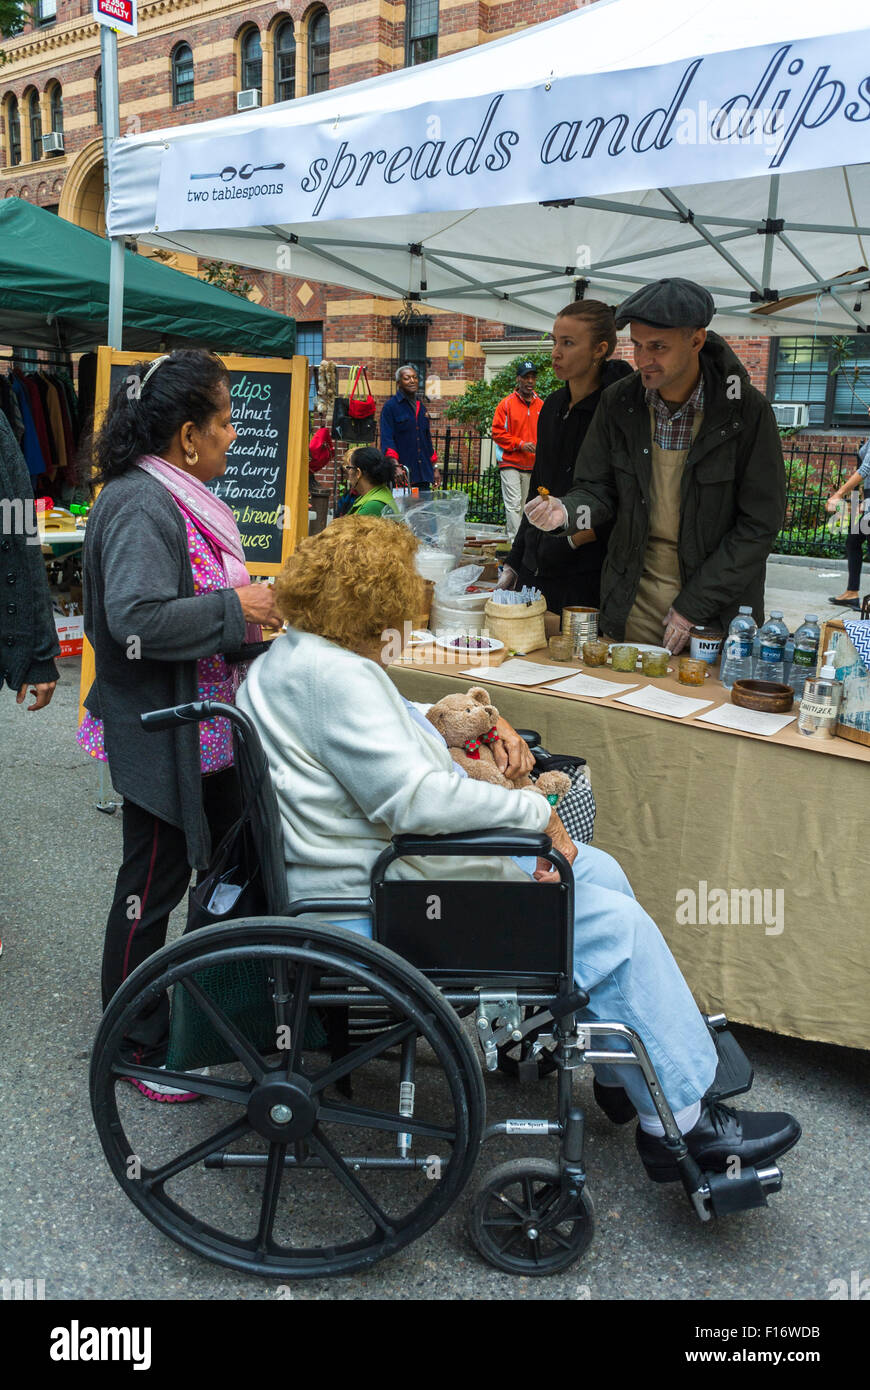 New York City, USA, Handicapped special needs, Senior Woman in Wheelchair, Shopping in Chelsea Street Flea Market, Summer, Street Food Stall 'Spreads and Dips', Street Vendor, social security senior usa Stock Photo